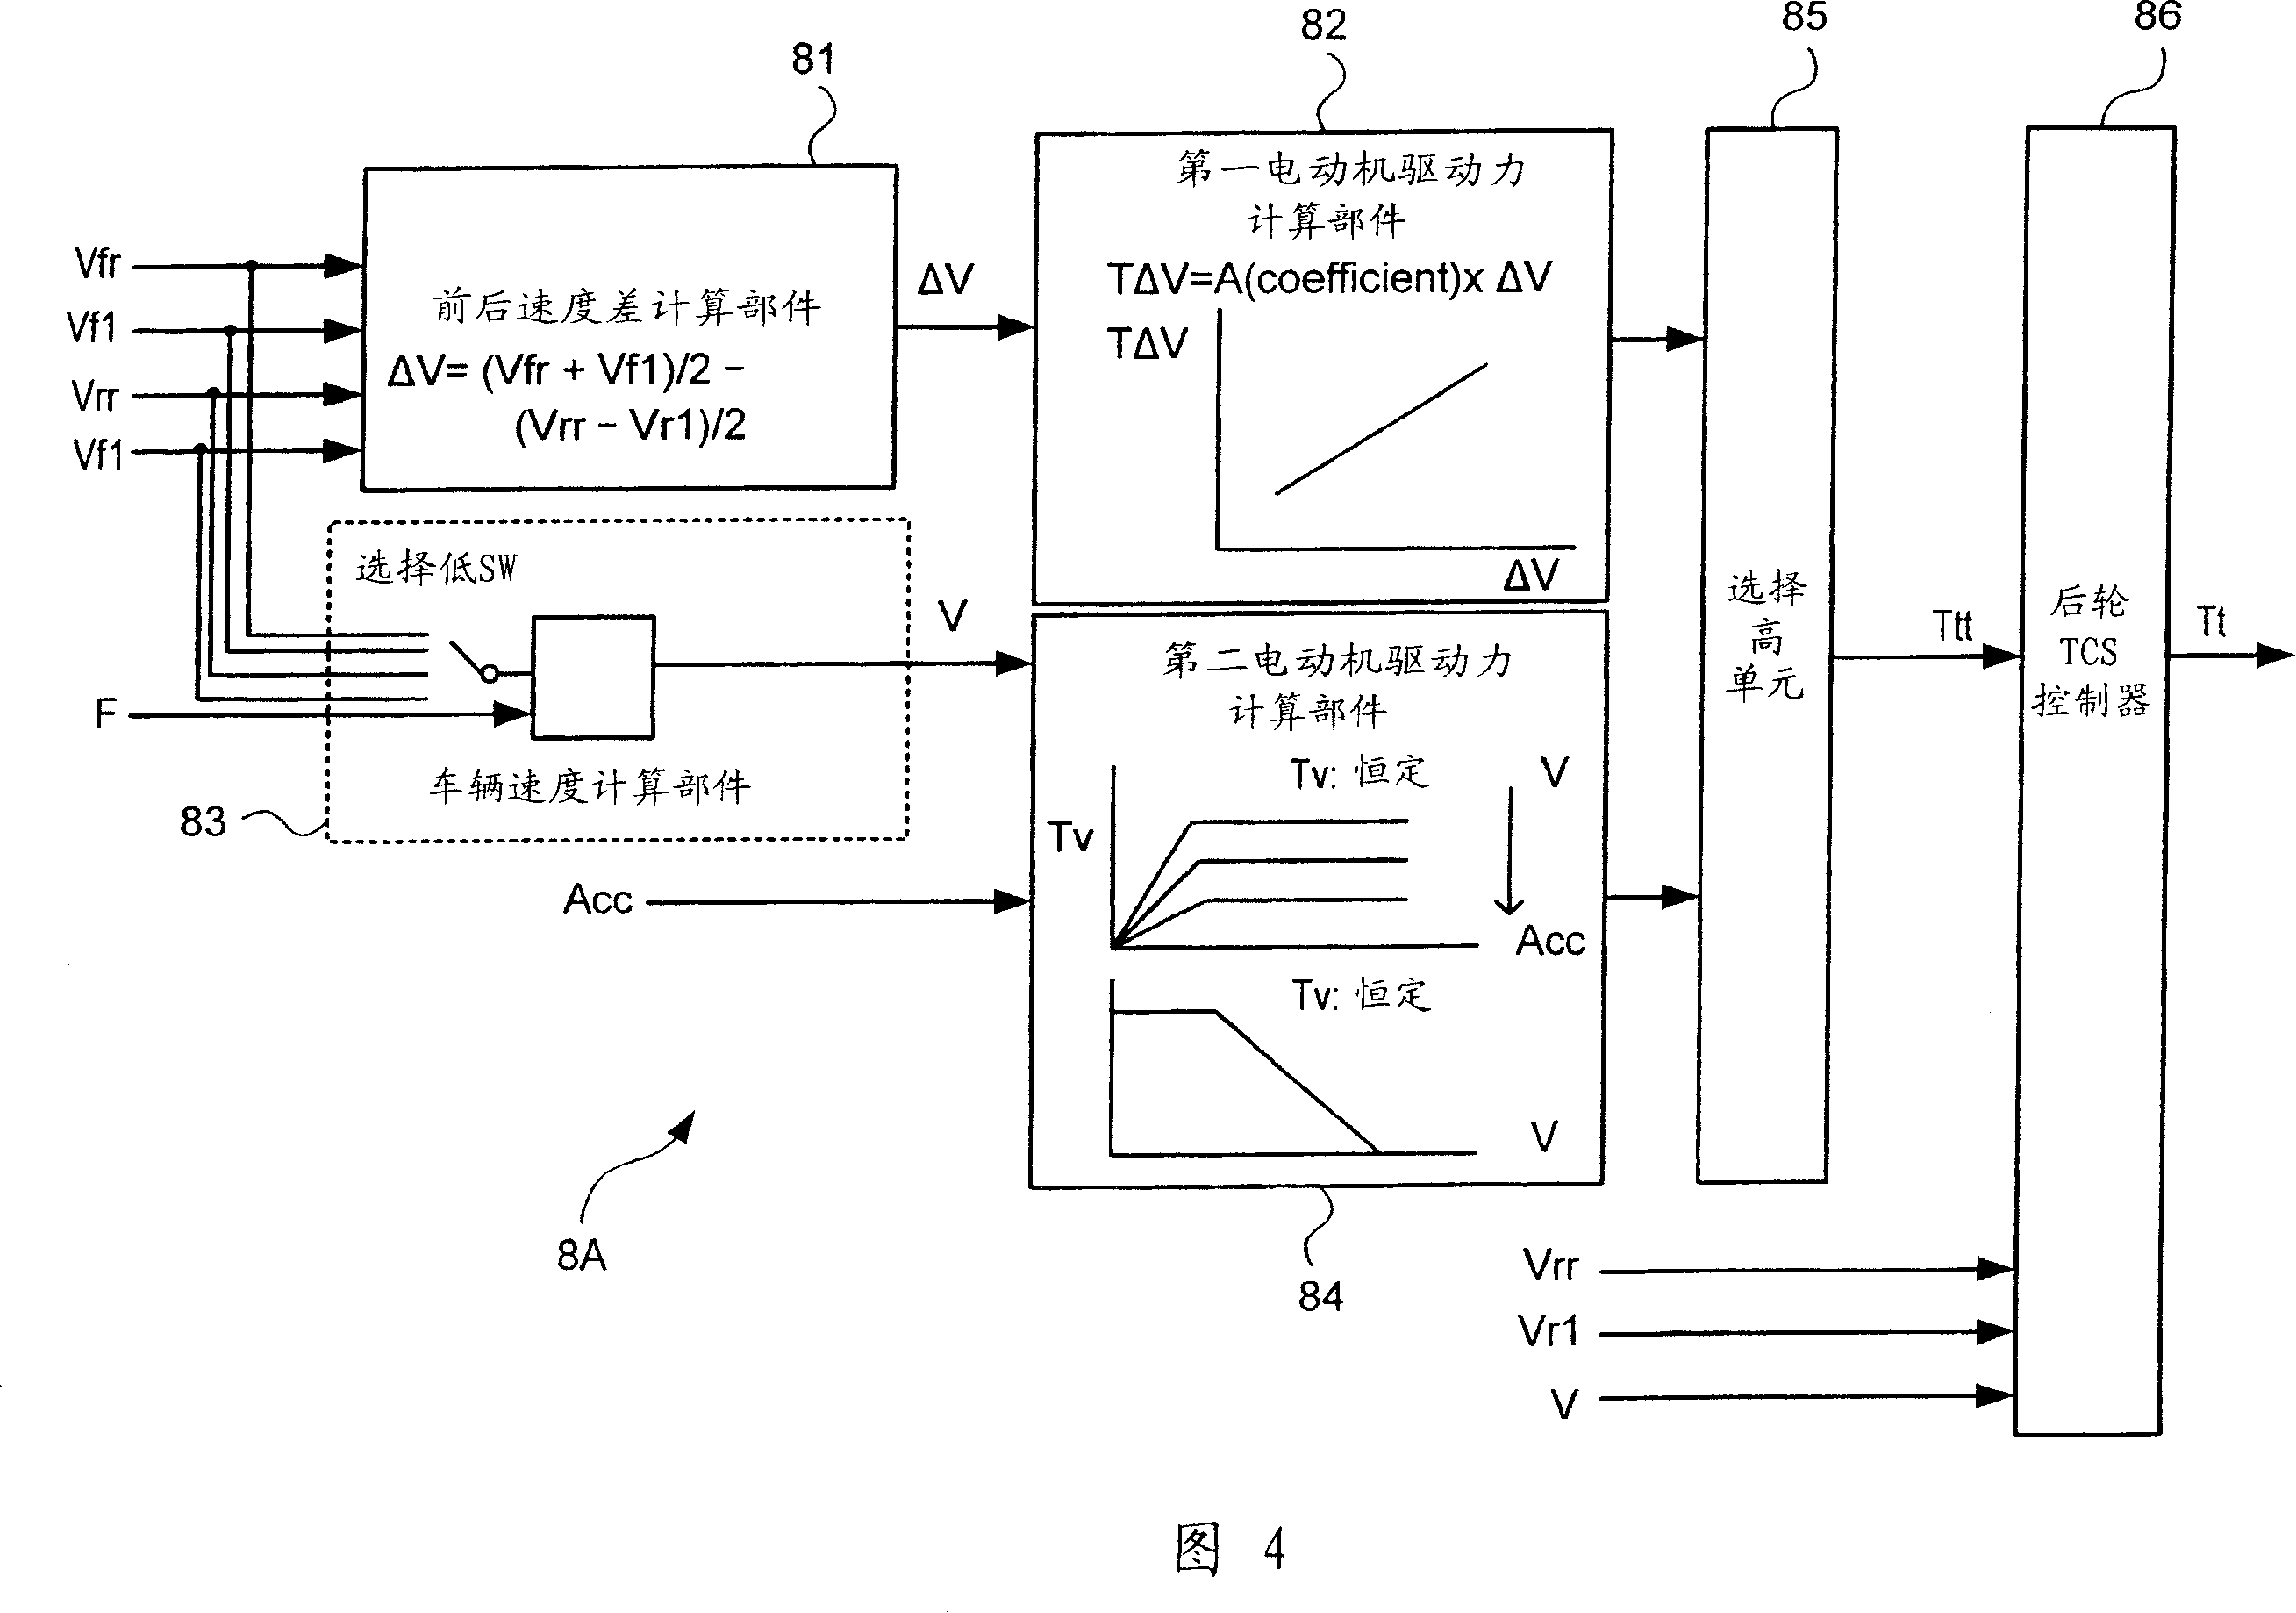 Generated power control system